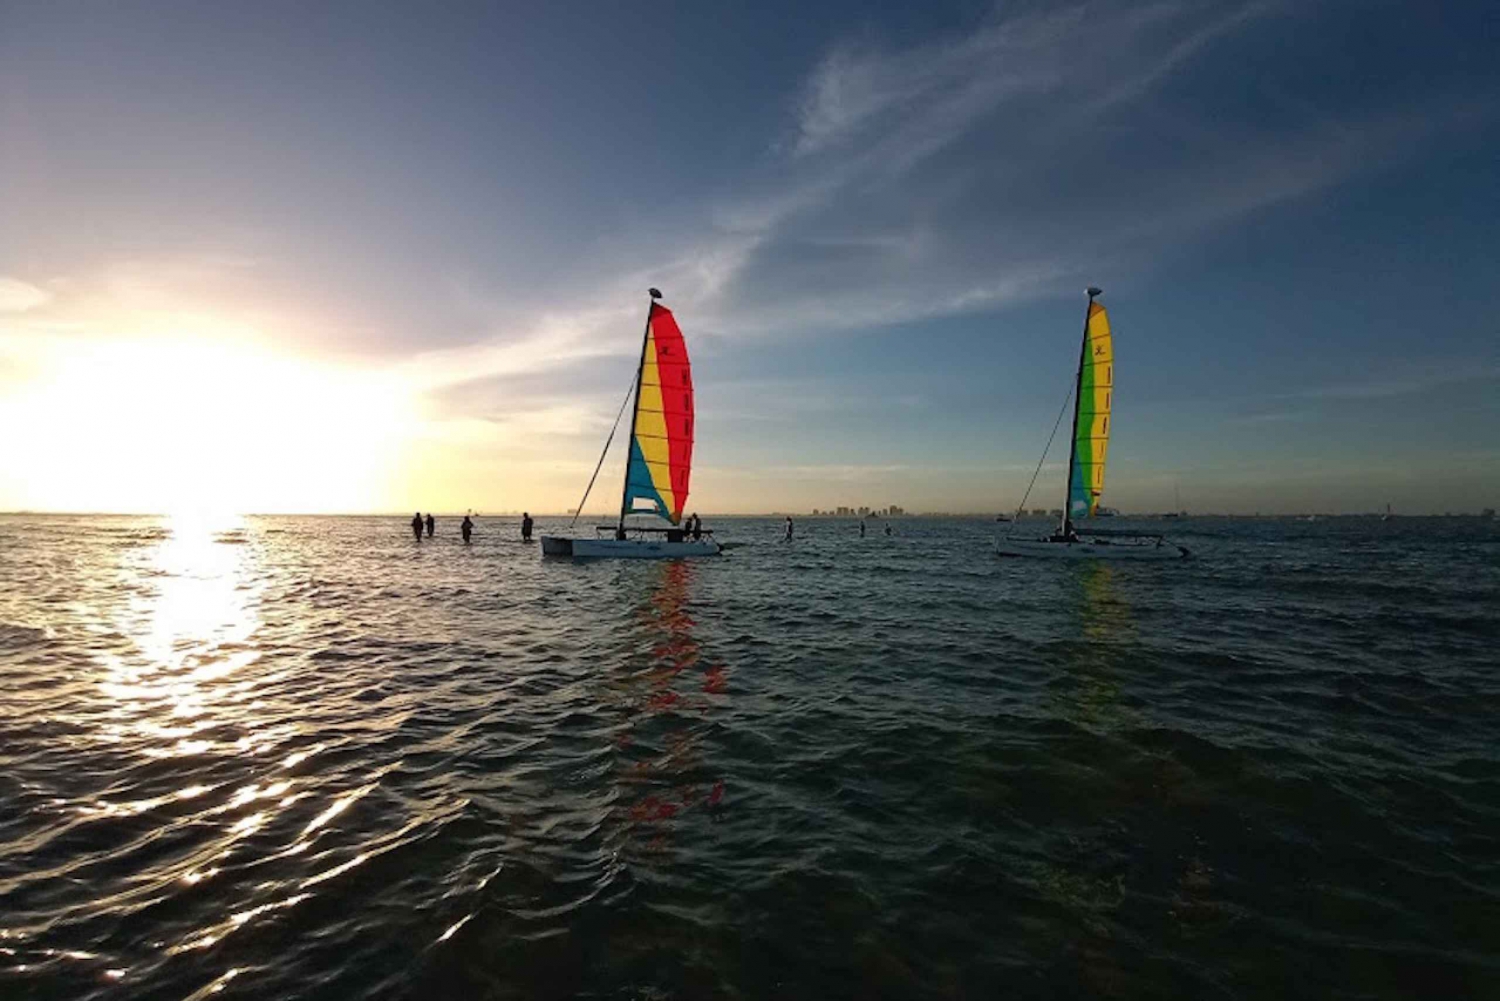 Miami: Intimate Sailing in Biscayne Bay w/ Food and Drinks